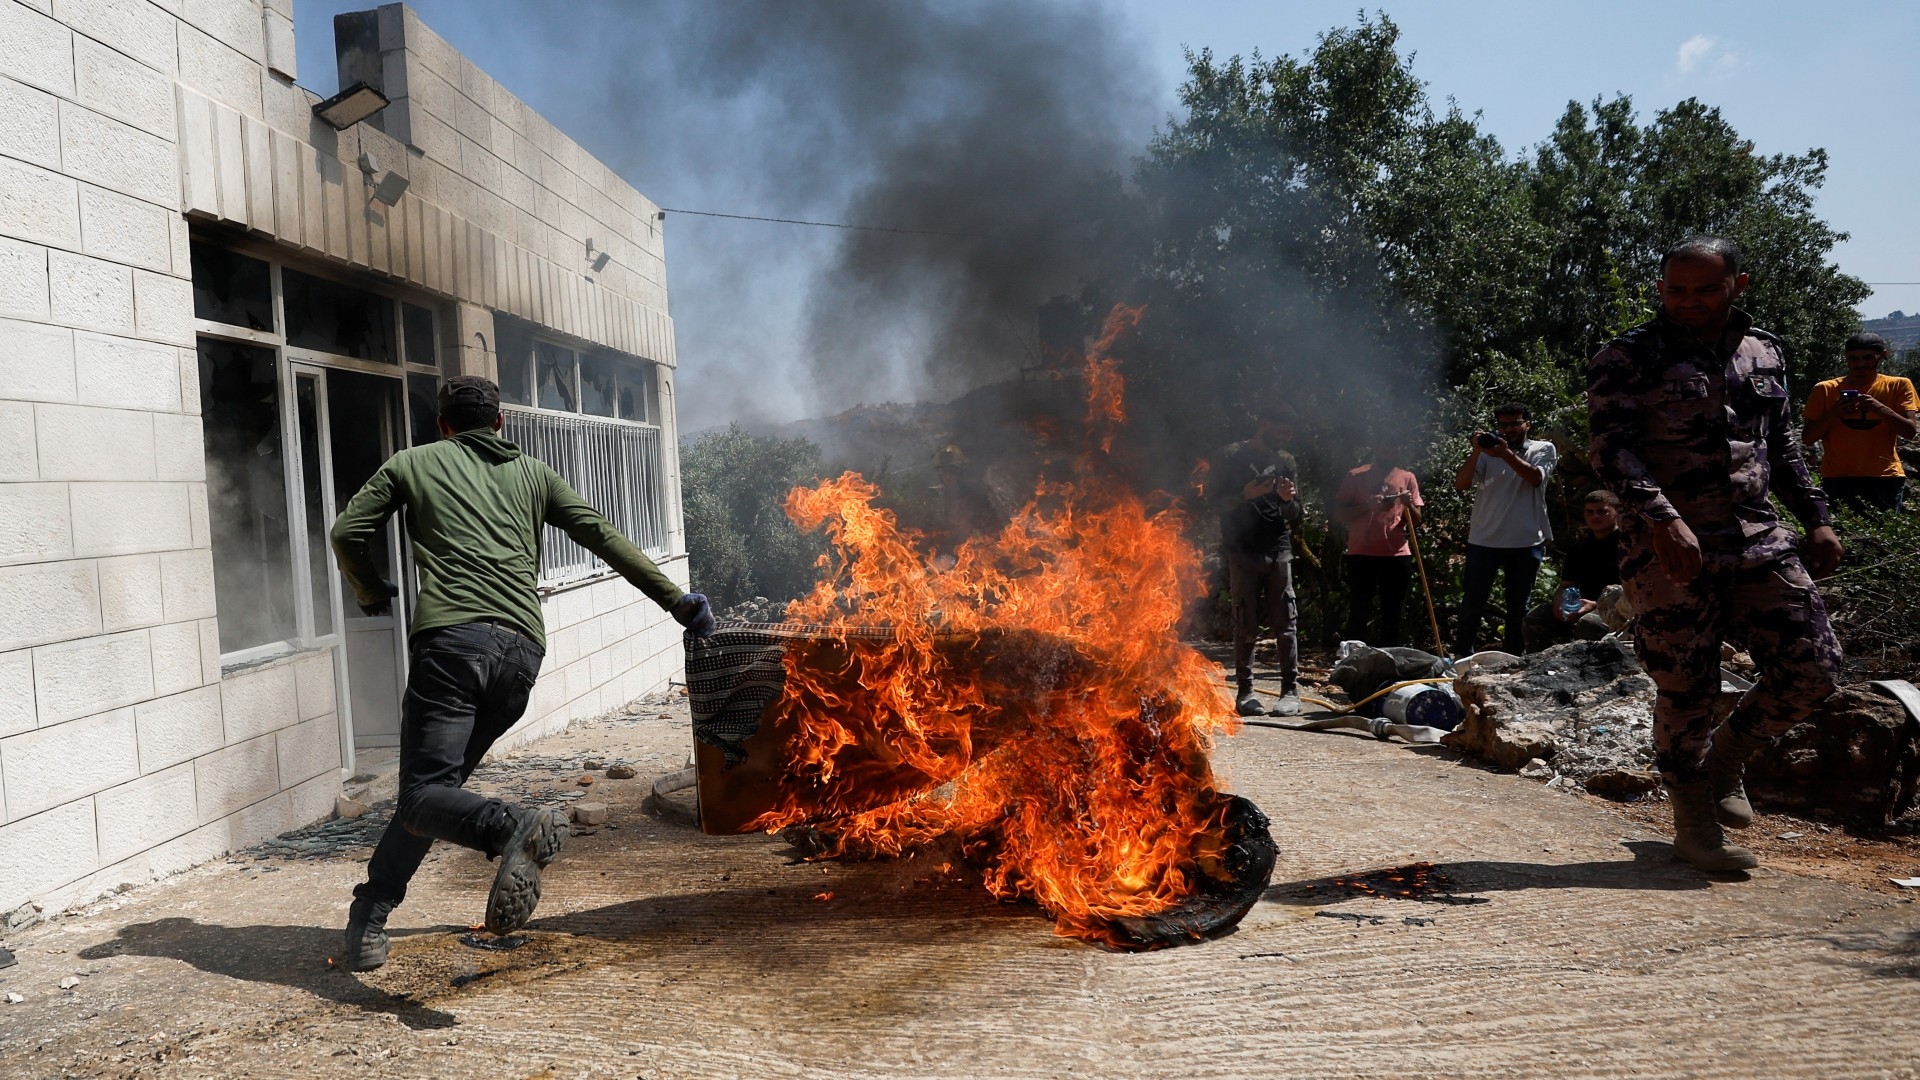 A Palestinian man runs near a burning object, after an attack by Israeli settlers, in Turmusaya, 21 June (Reuters)